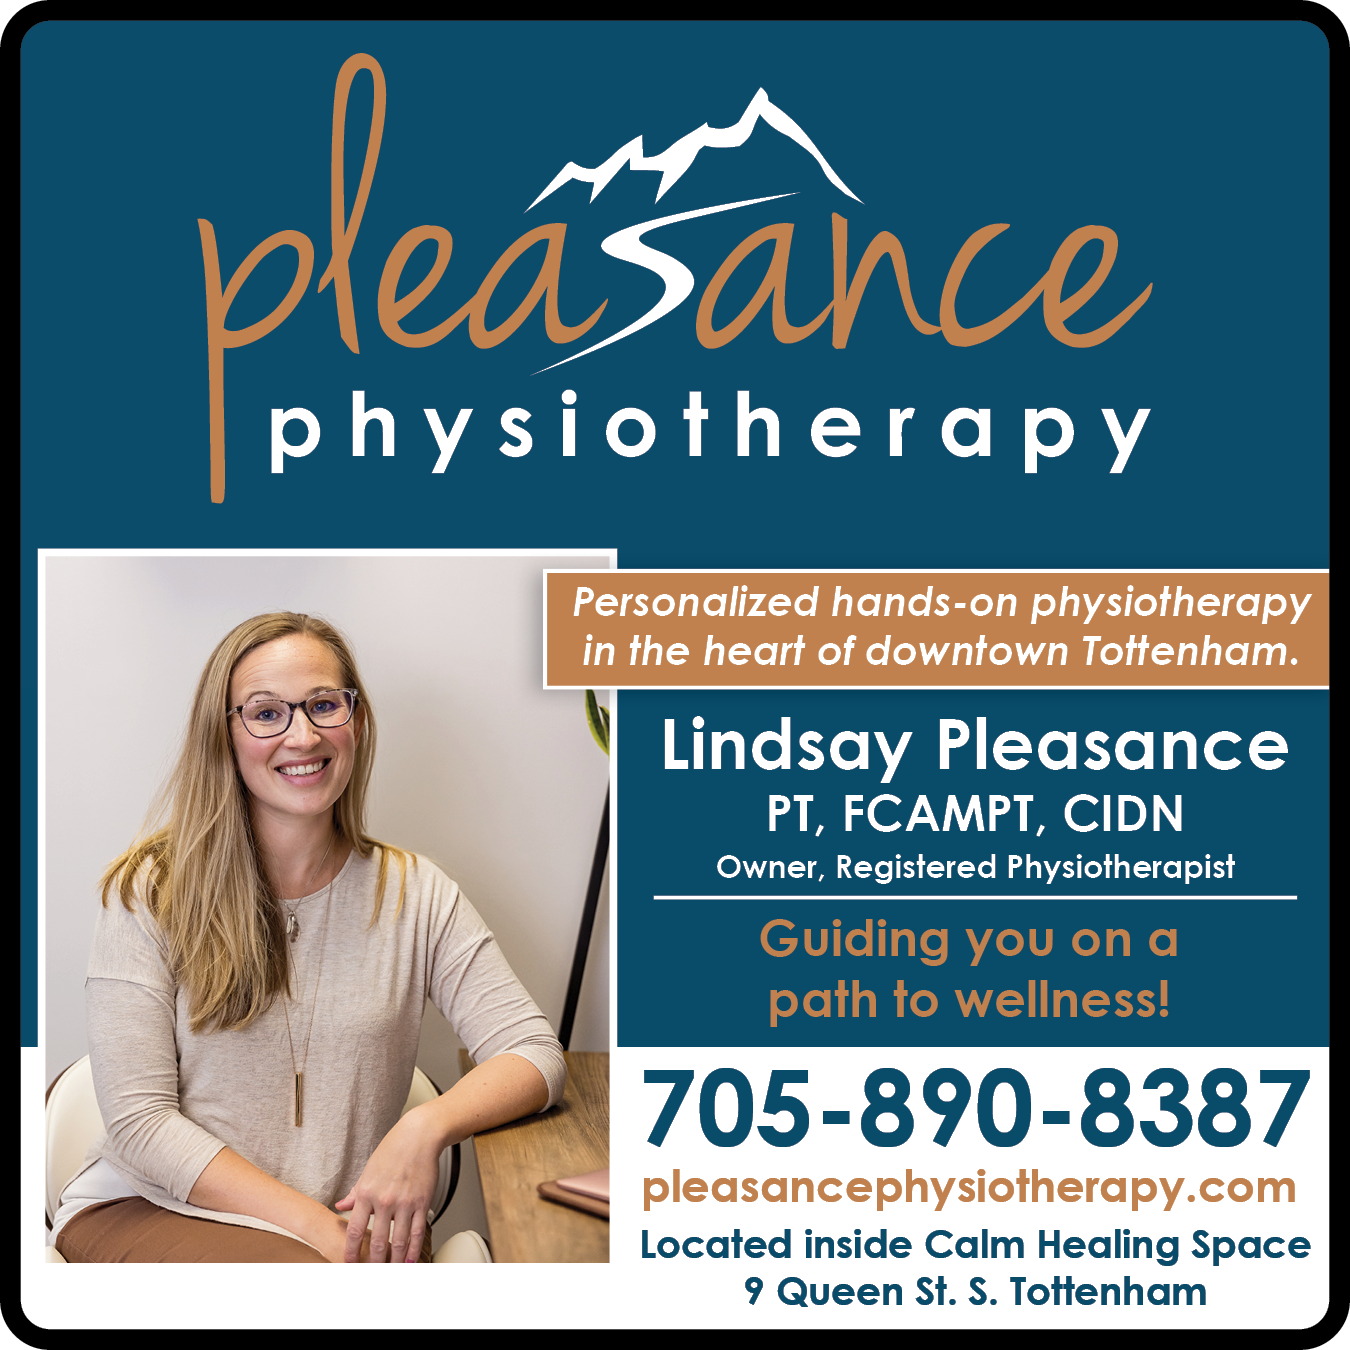 Pleasance Physiotherapy